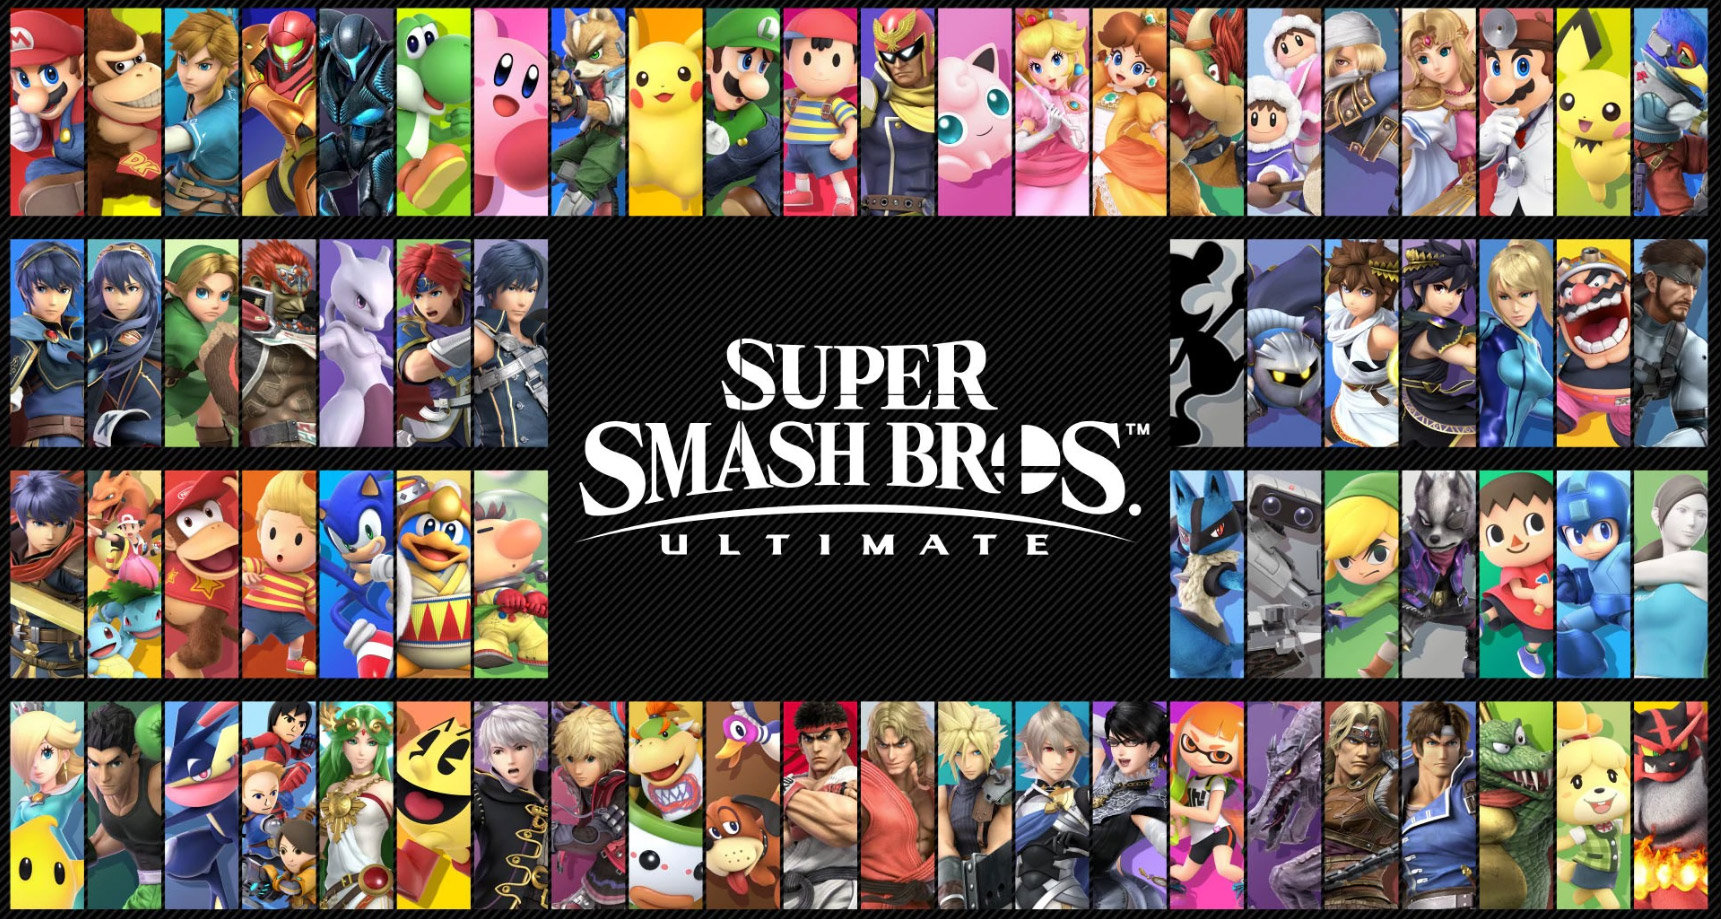 Super Smash Bros. Ultimate is done with Balance Patches